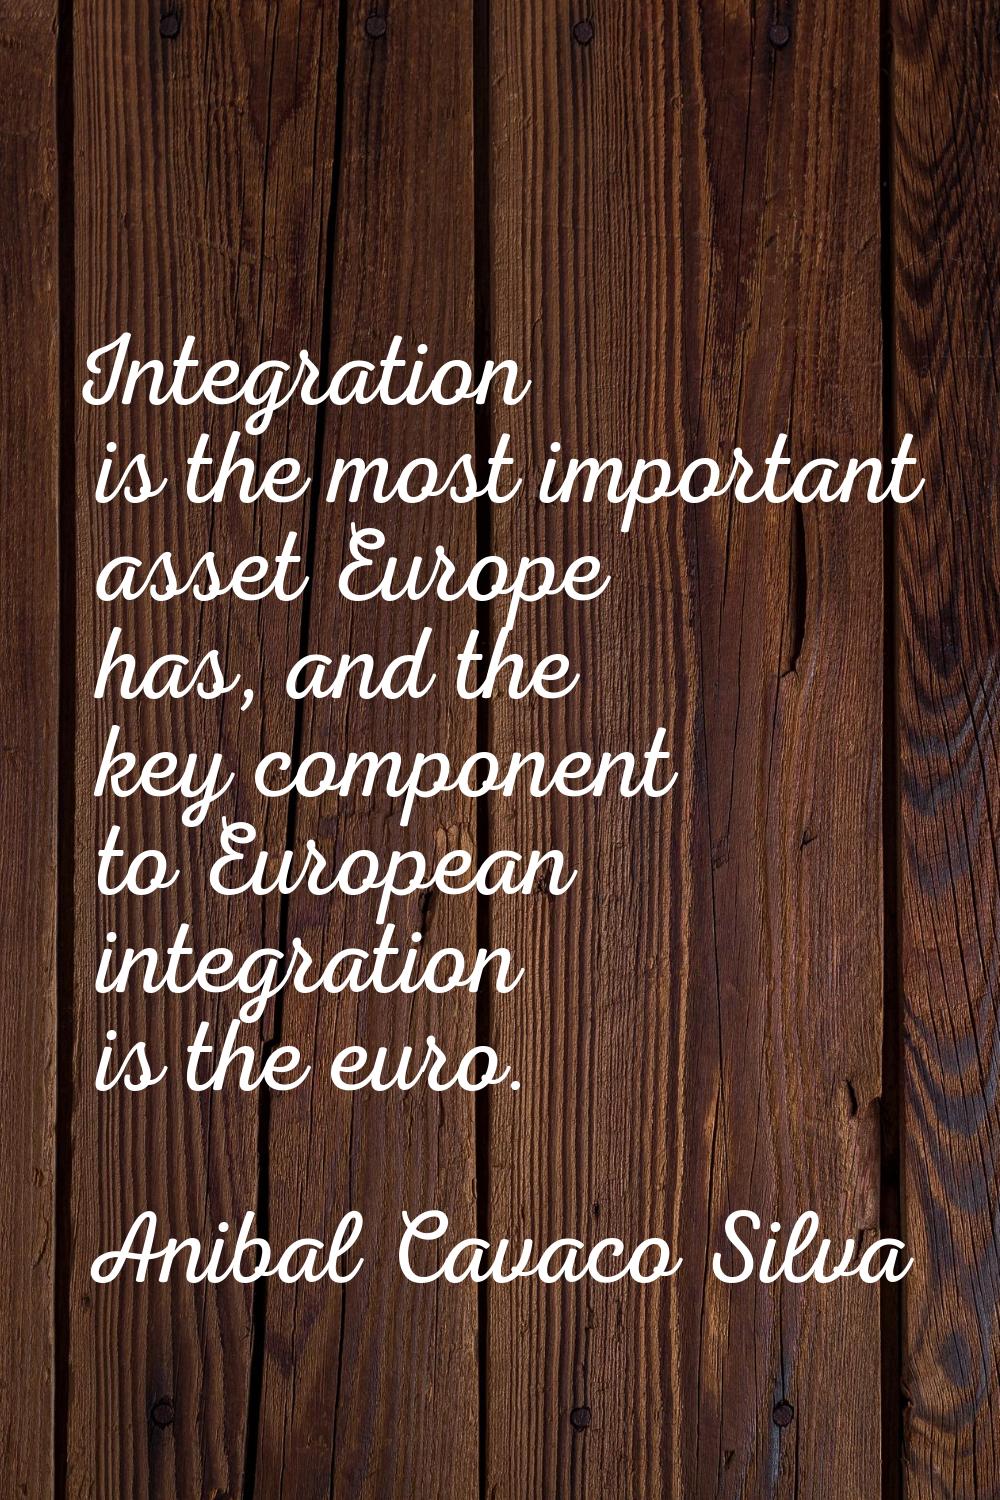 Integration is the most important asset Europe has, and the key component to European integration i